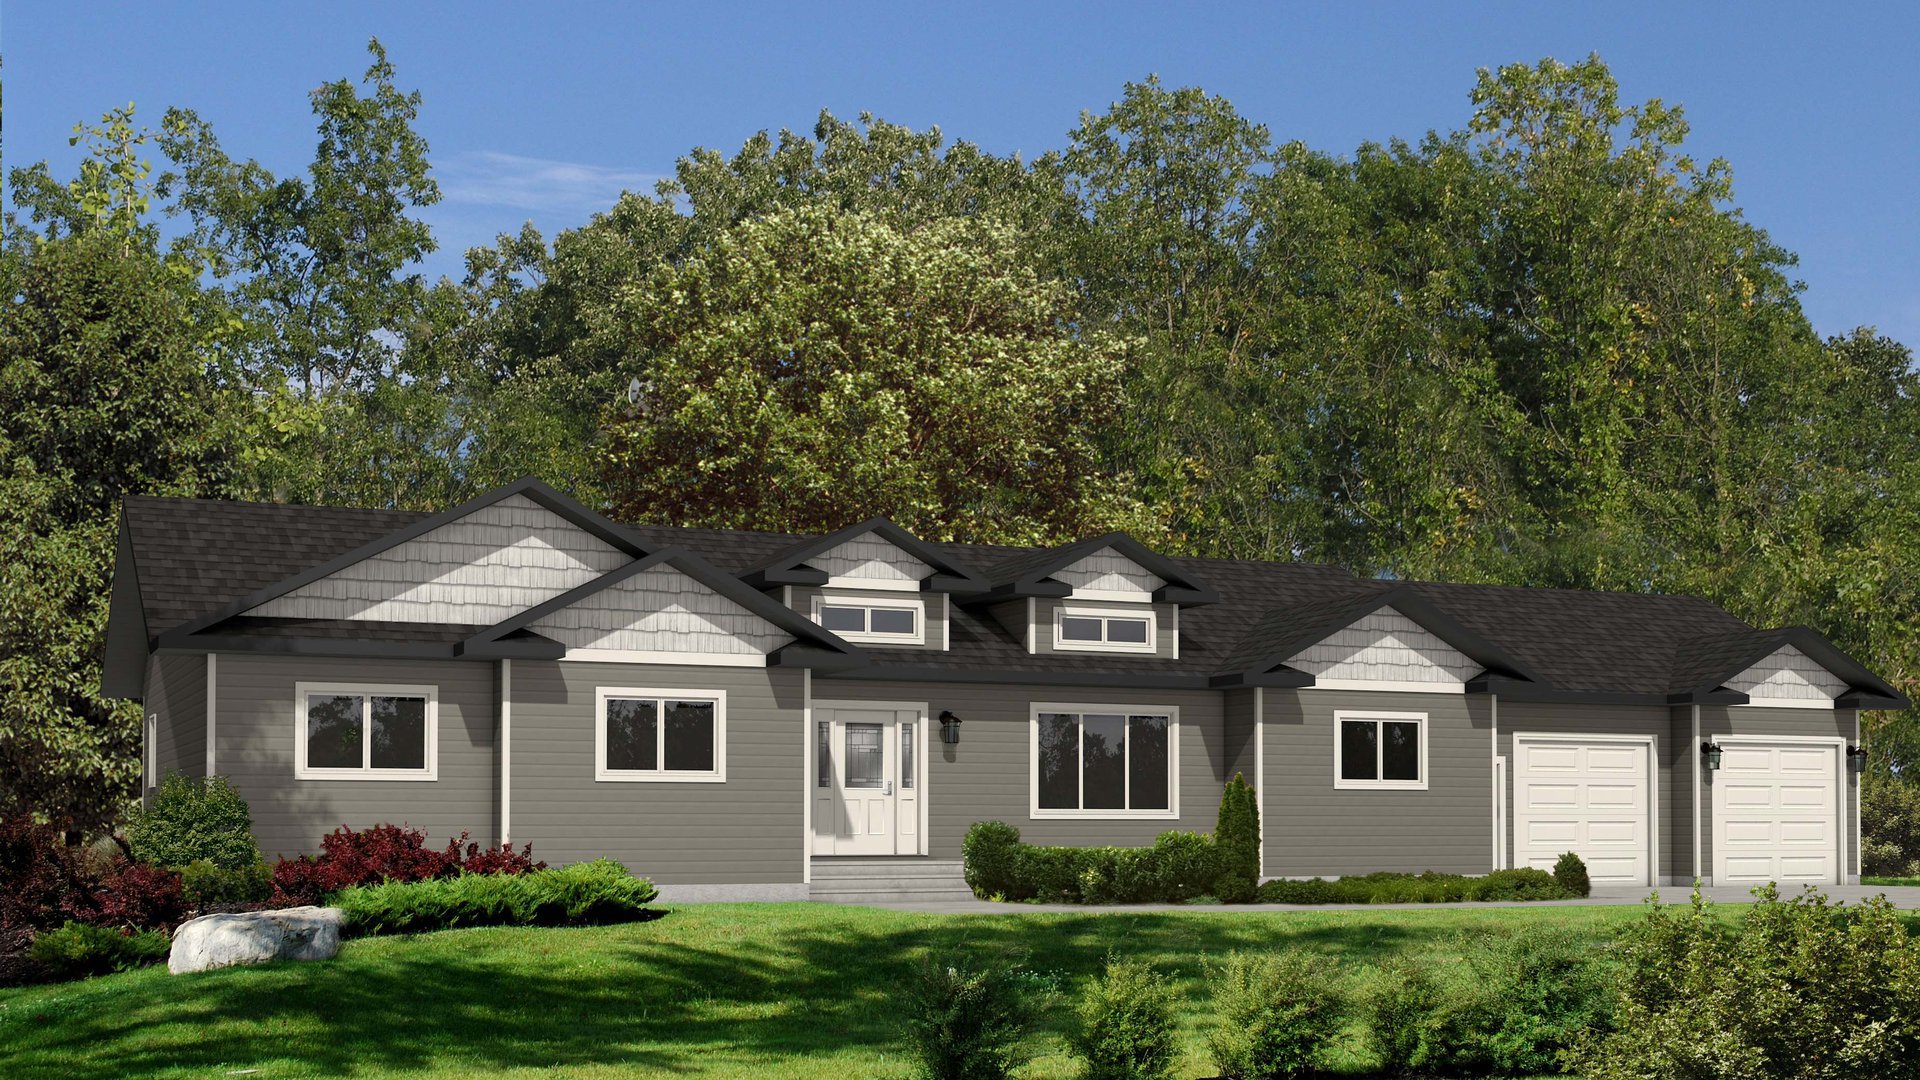 Calder house plan modular homes nelson homes ready to move homes prefabricated home packages.jpg